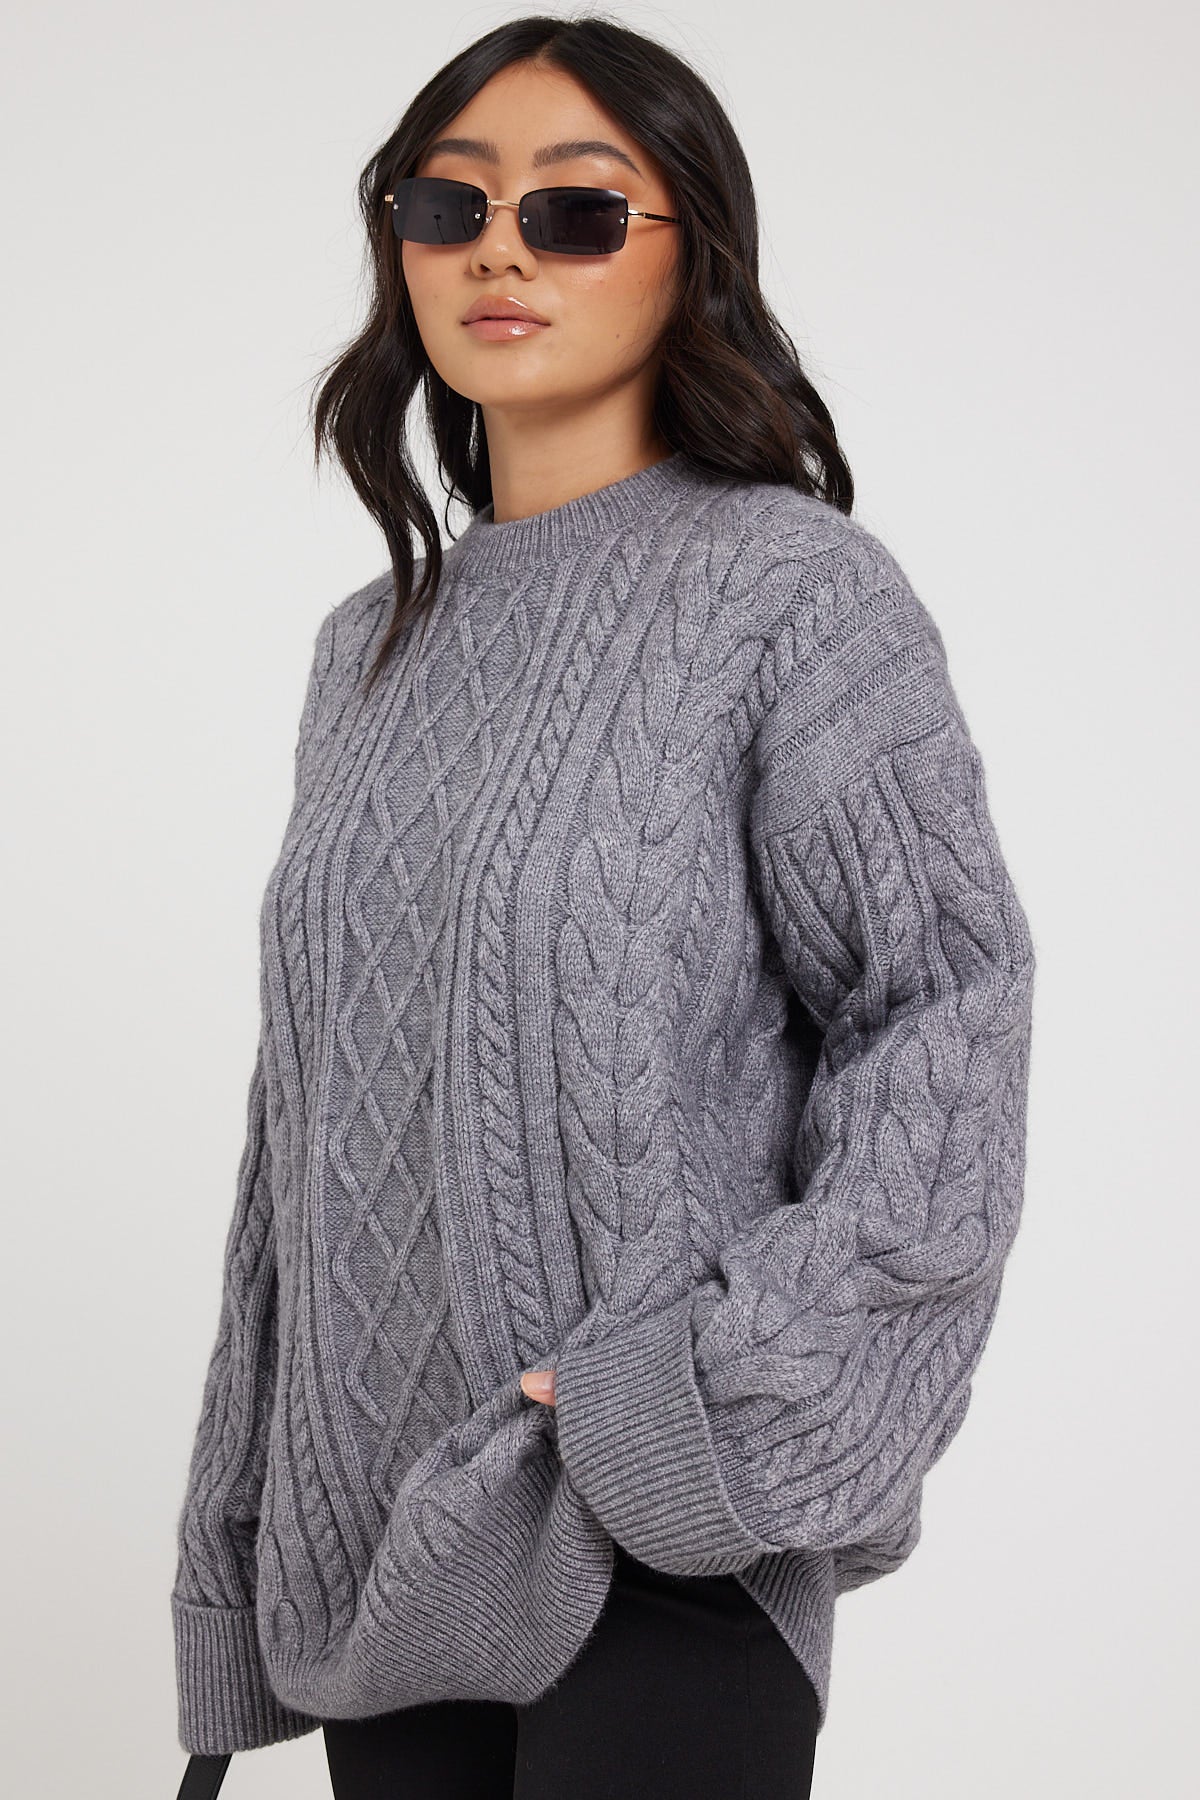 Sndys The Label Nellie Jumper Grey